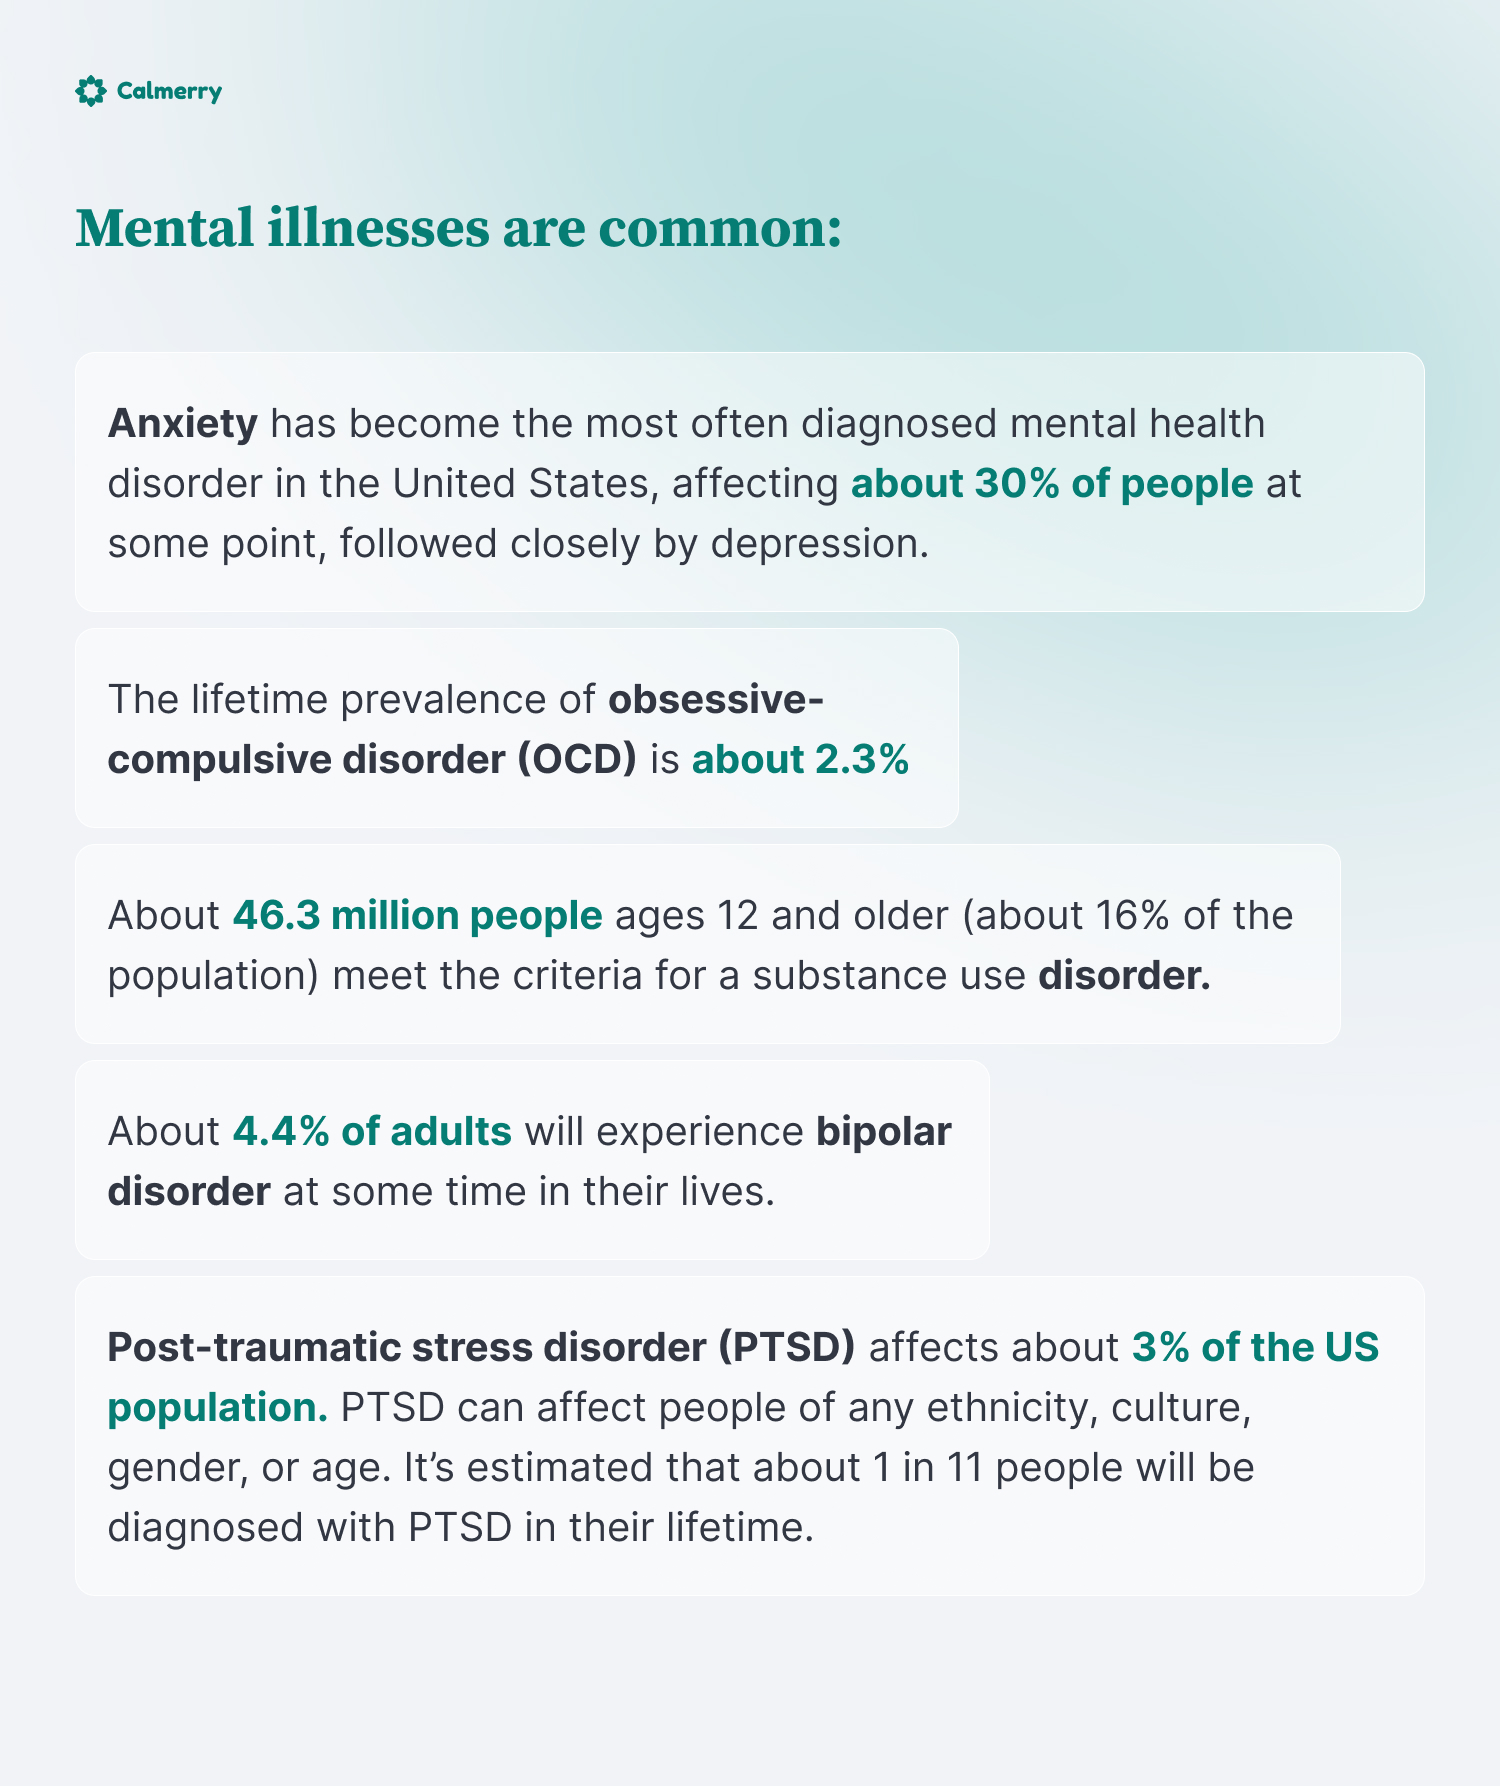 Mental illnesses are common: Anxiety has become the most often diagnosed mental health disorder in the United States, affecting about 30% of people at some point, followed closely by depression. About 46.3 million people ages 12 and older (about 16% of the population) meet the criteria for a substance use disorder. Post-traumatic stress disorder (PTSD) affects about 3% of the US population. PTSD can affect people of any ethnicity, culture, gender, or age. It’s estimated that about 1 in 11 people will be diagnosed with PTSD in their lifetime. About 4.4% of adults will experience bipolar disorder at some time in their lives. The lifetime prevalence of obsessive-compulsive disorder (OCD) is about 2.3%